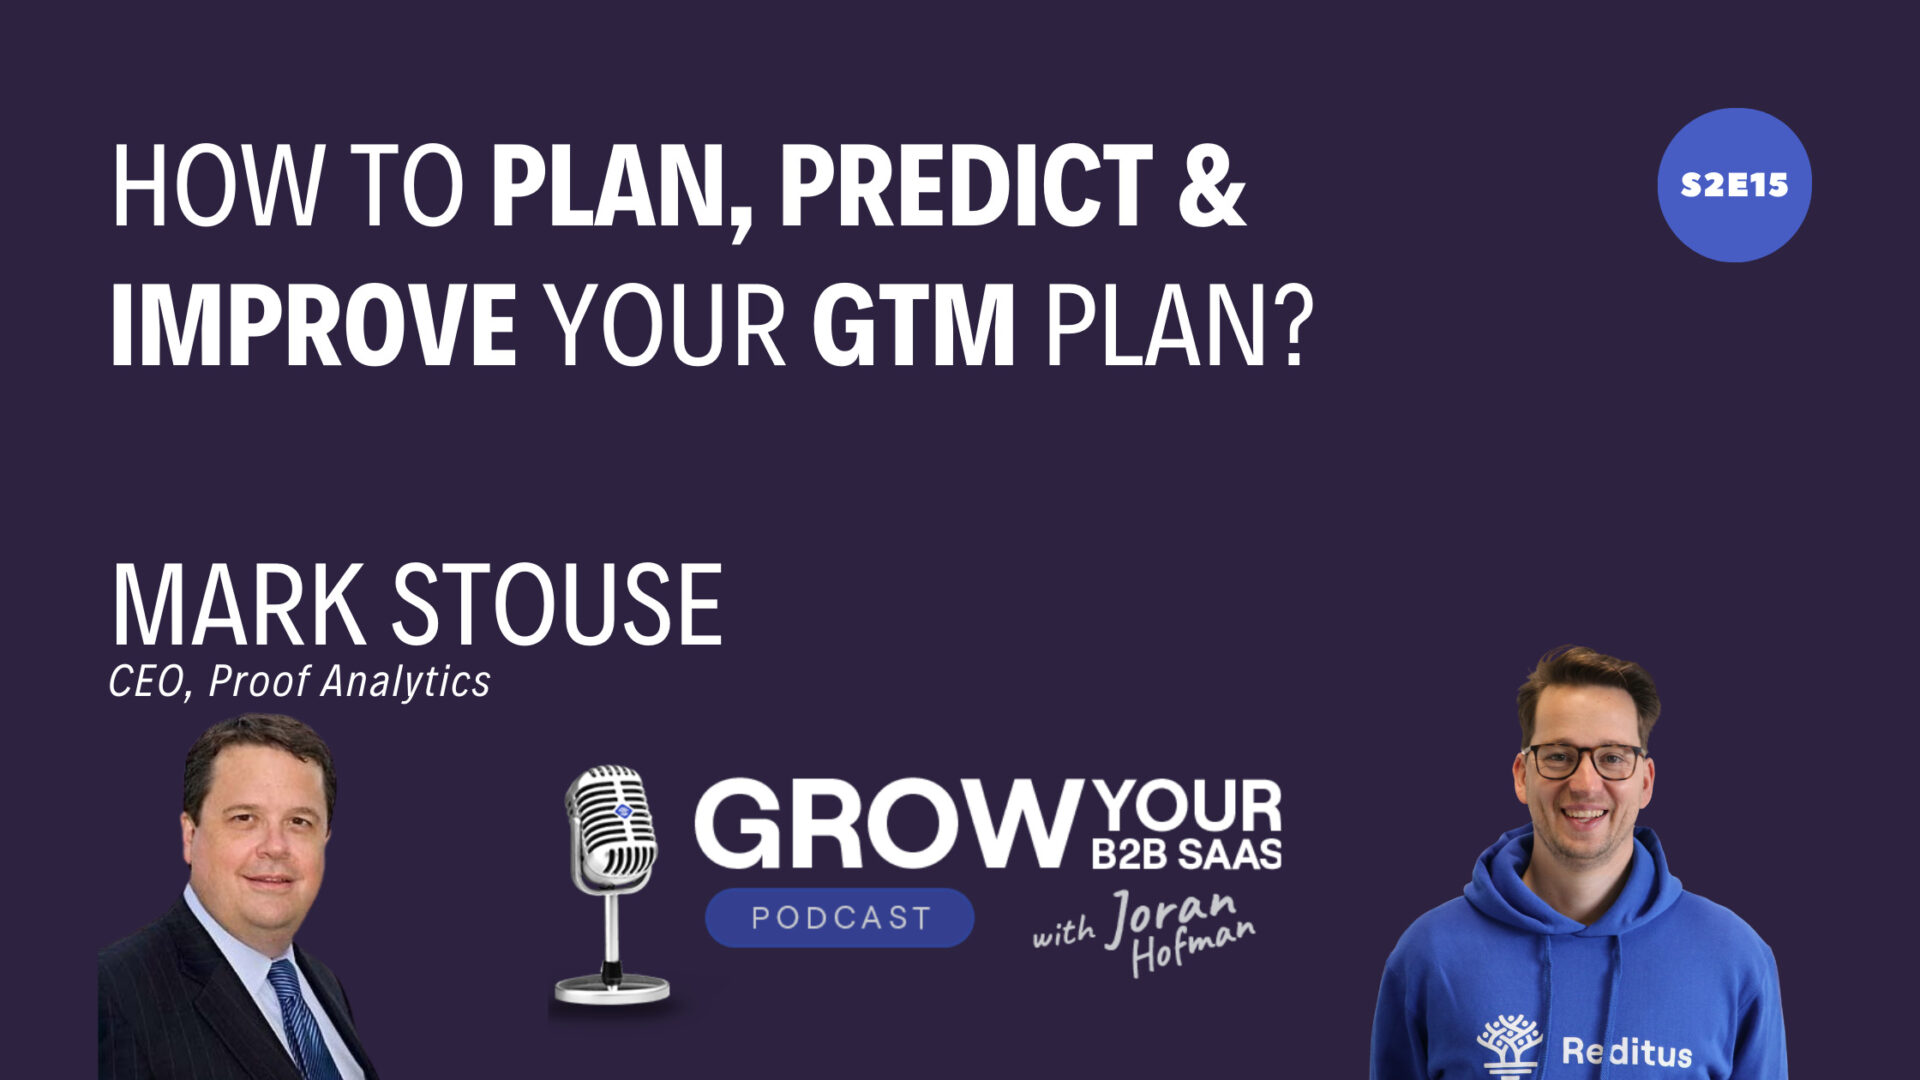 https://www.getreditus.com/podcast/s2e15-how-to-plan-predict-prove-your-go-to-market-plan-with-mark-stouse/